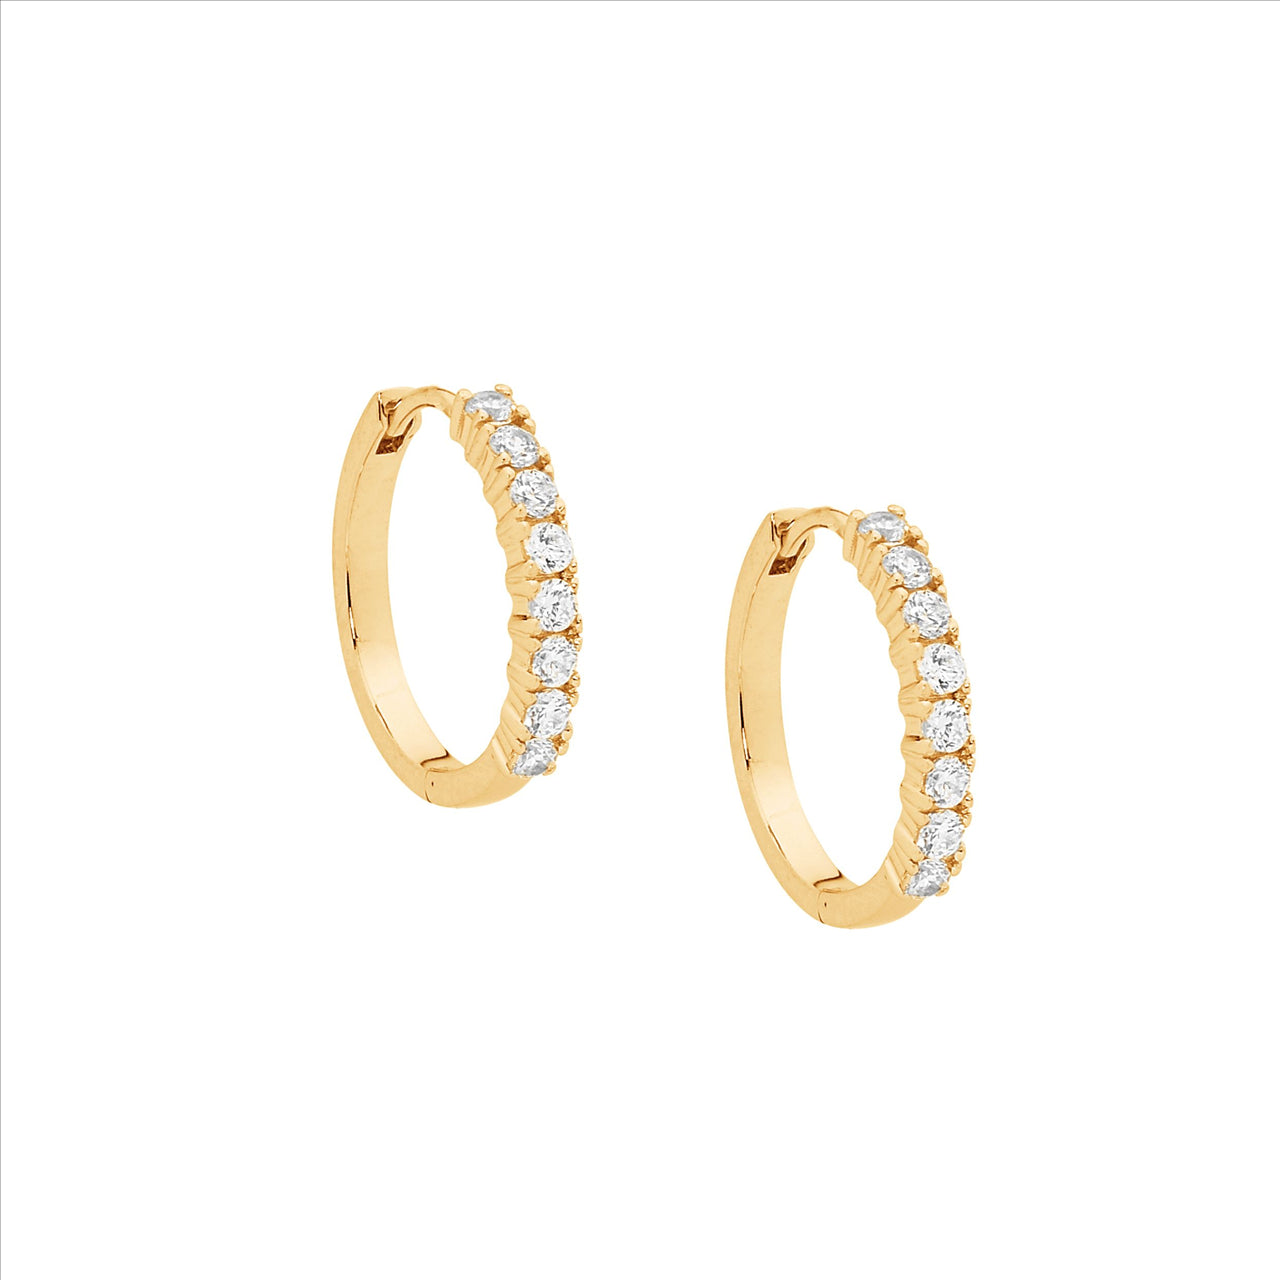 Ellani Sterling Silver Yellow Gold Plated White Cubic Zirconia Huggie Earrings